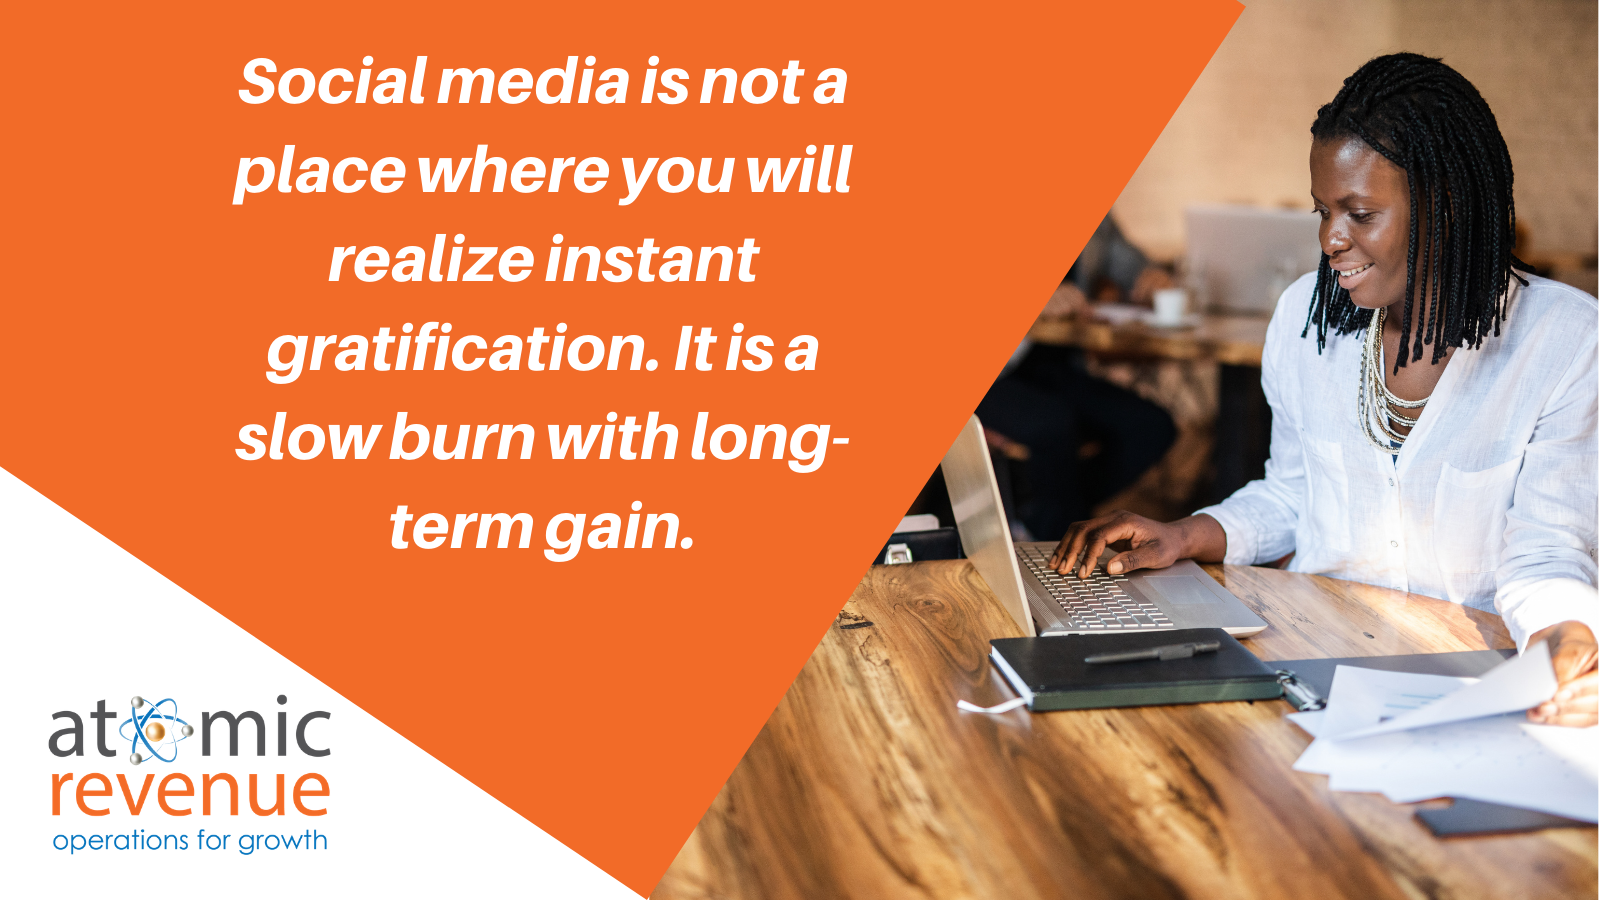 b2b social media takes time but you can see big benefits